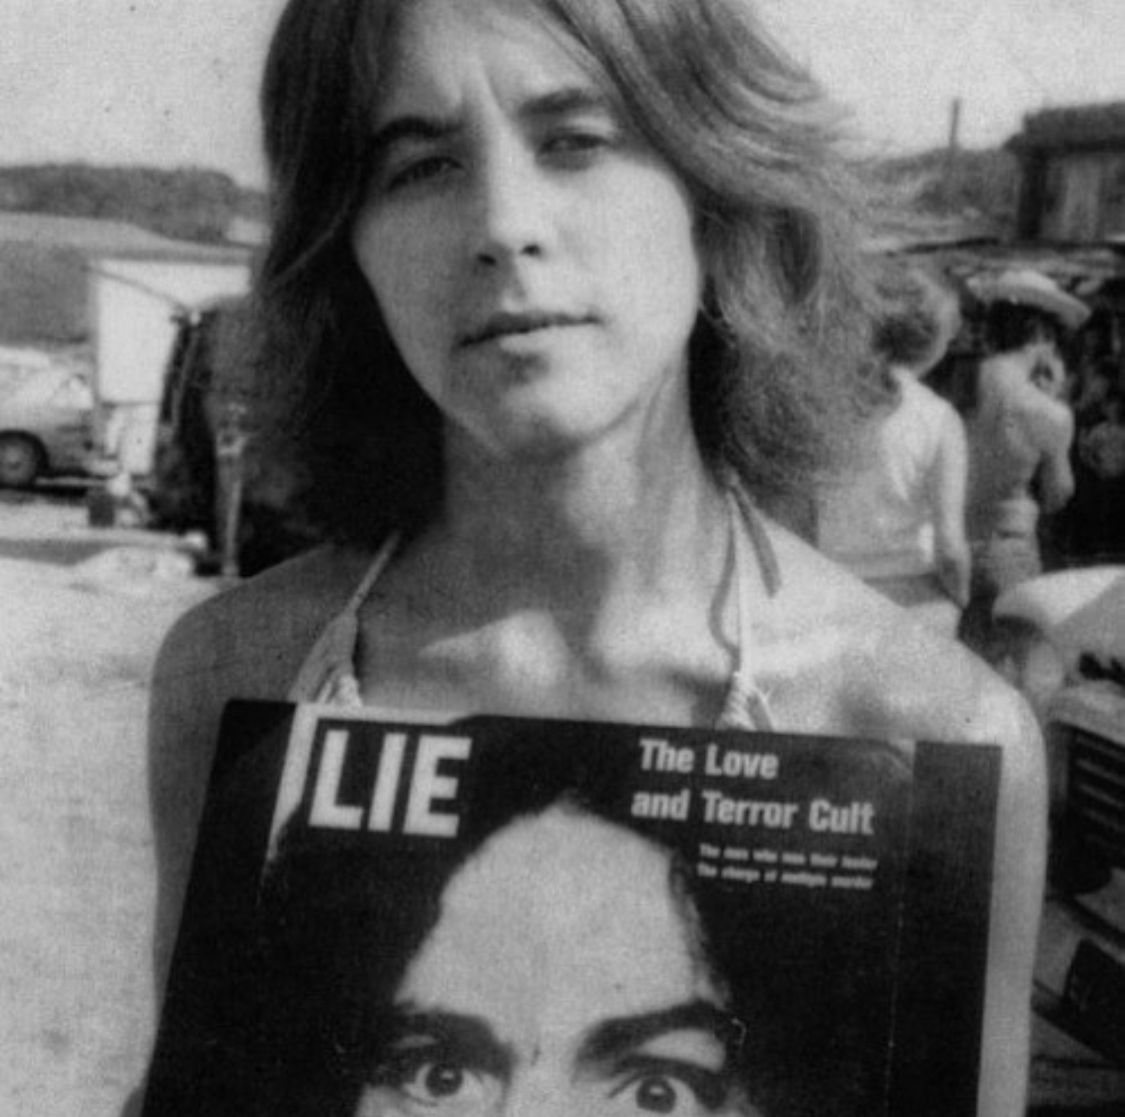 Ruth Ann Moorehouse holding Charlie's first record, LIE | Charles manson family, Manson family, Charles manson